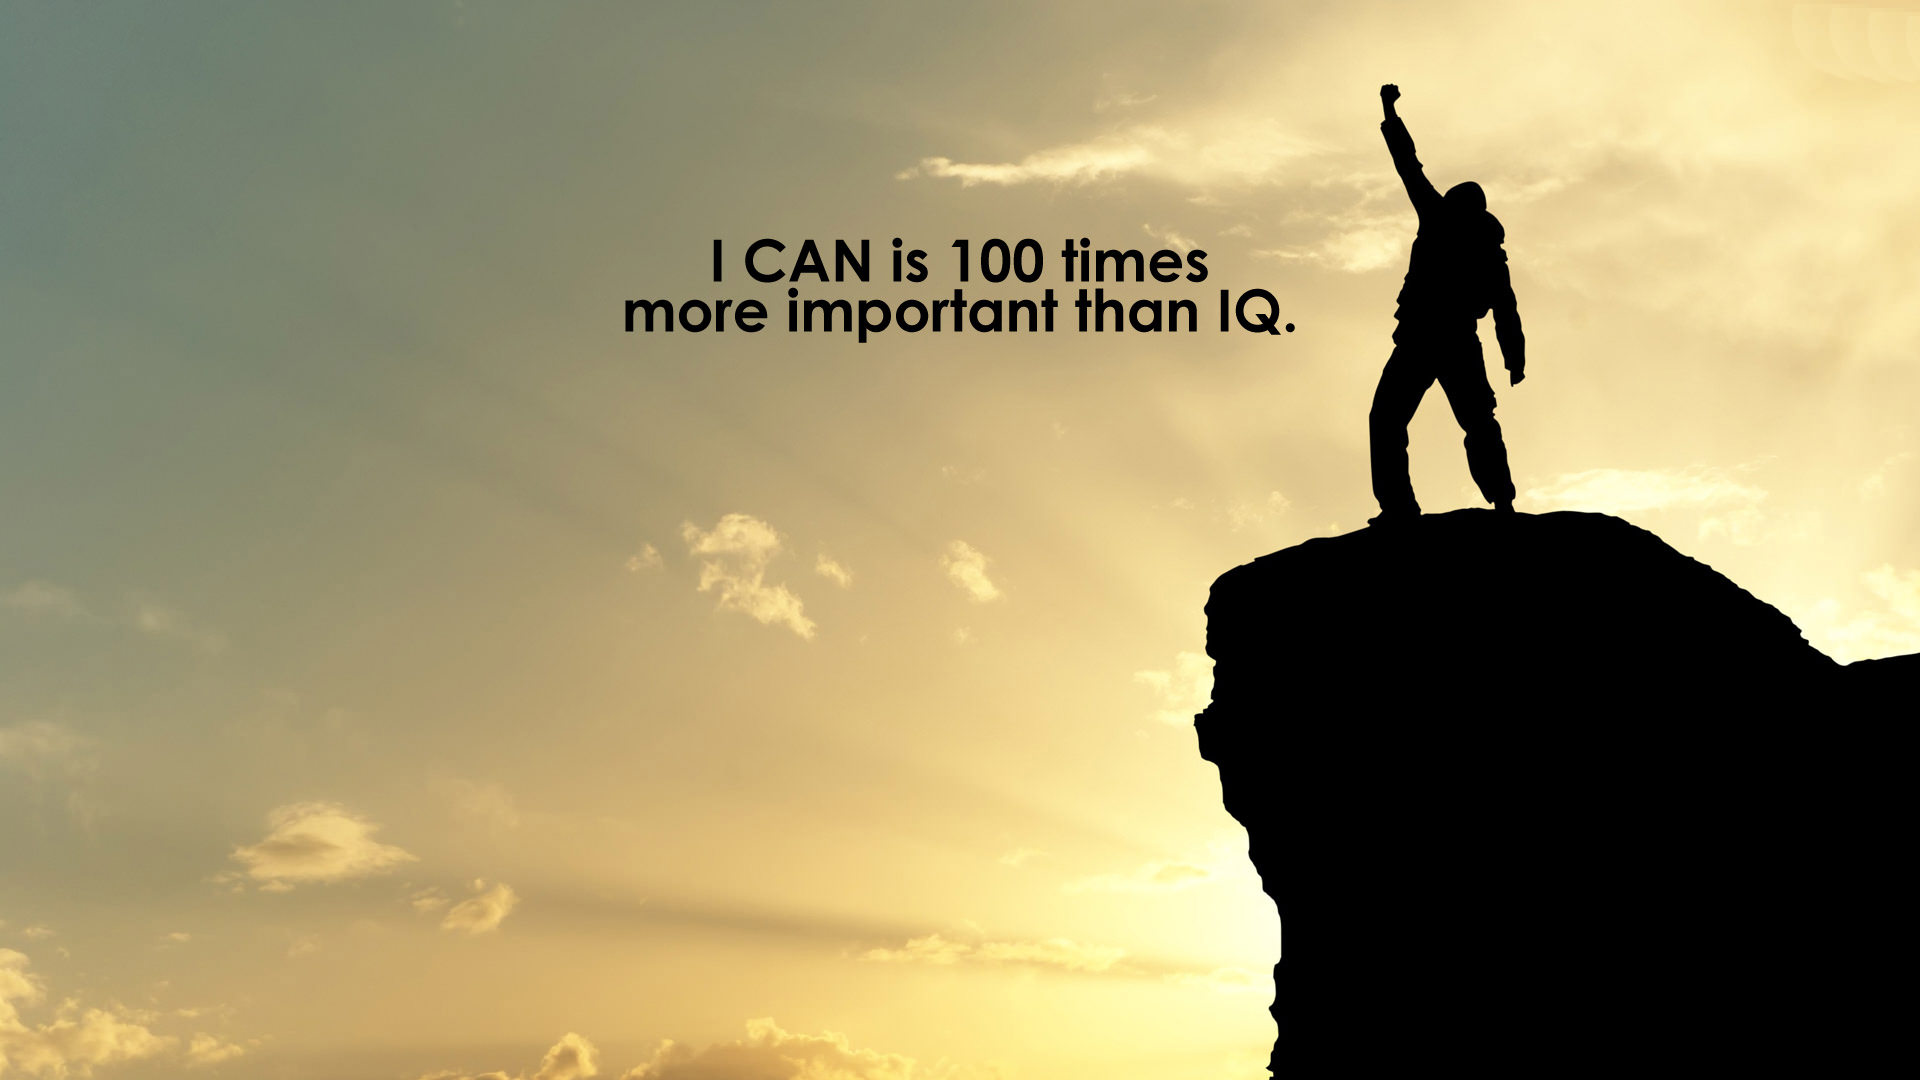 I can is 100 times more important than IQ